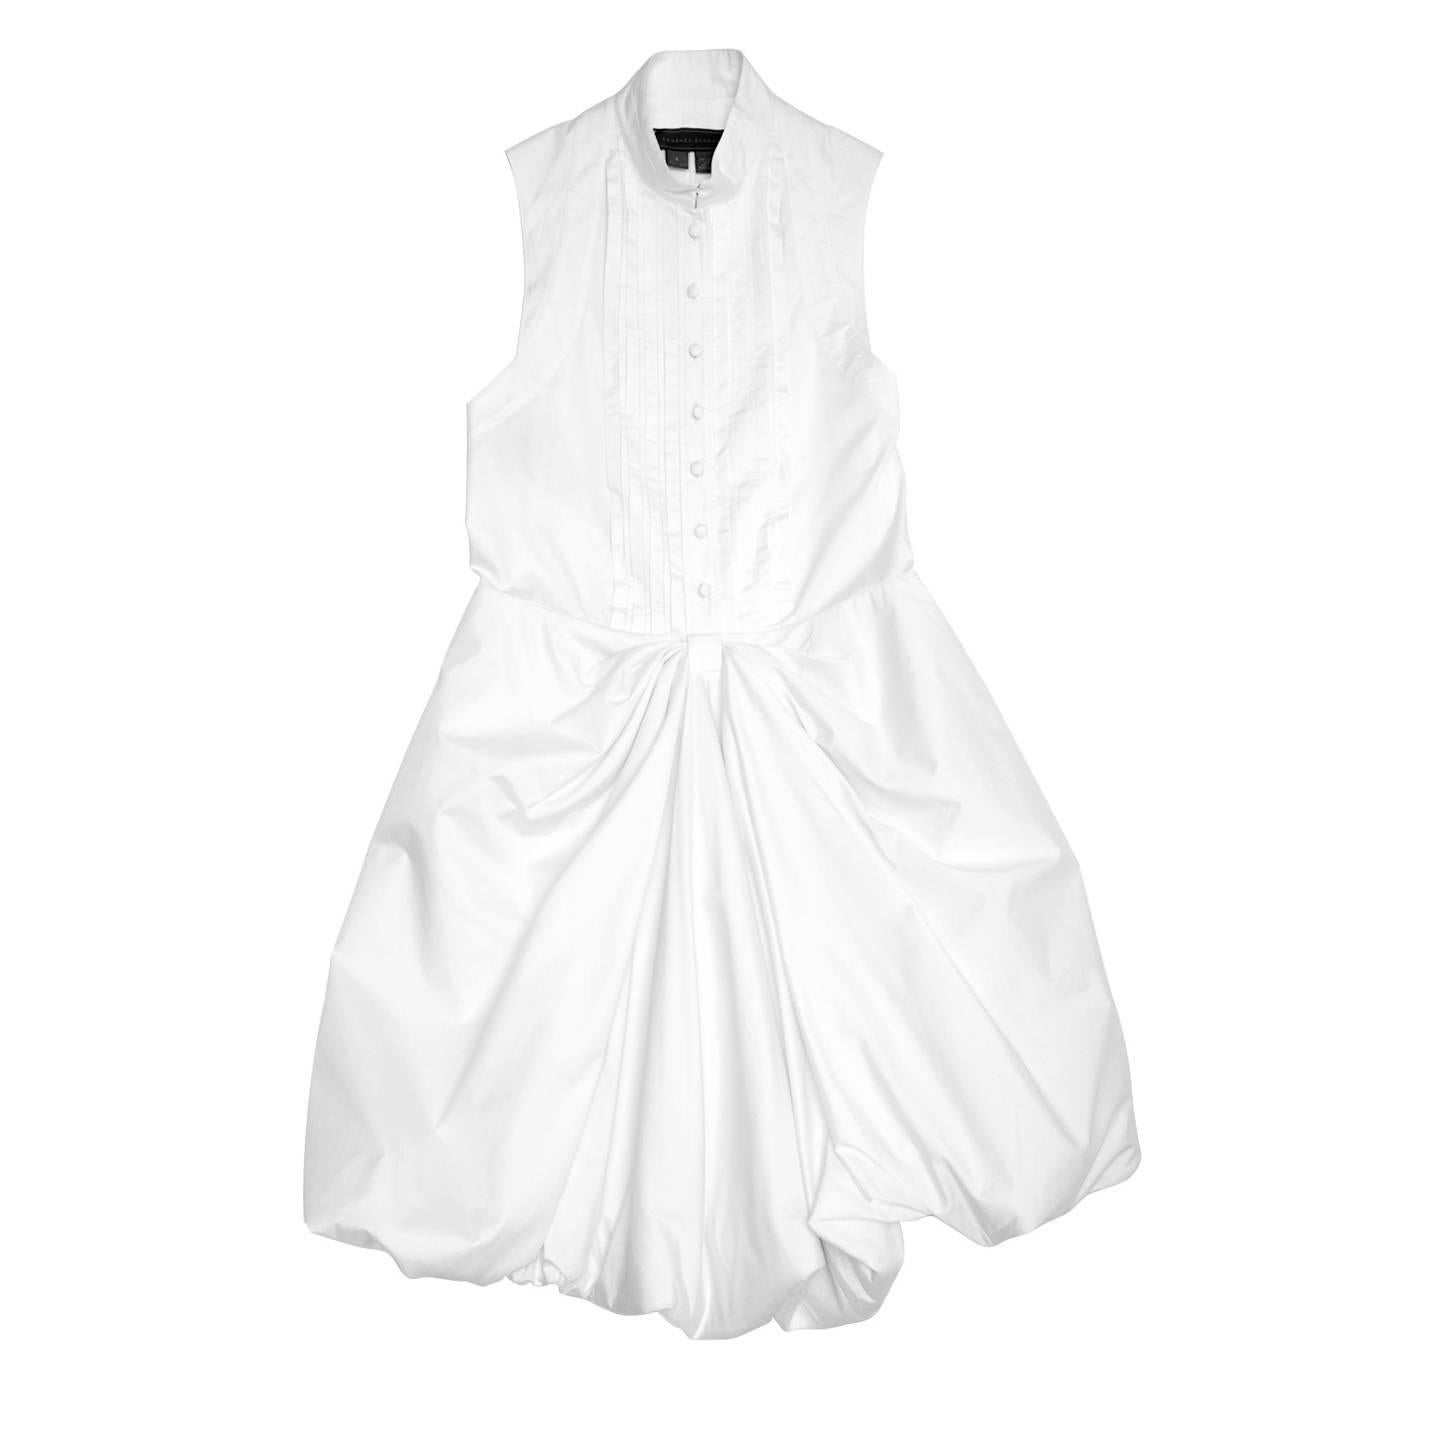 White cotton sleeveless shirt dress with full knee length puff skirt and bow style drapes at front under waist. The front fastens with covered buttons until the waist line, the bib detail is enriched by fixed pleats and the Nehru collar fastens with